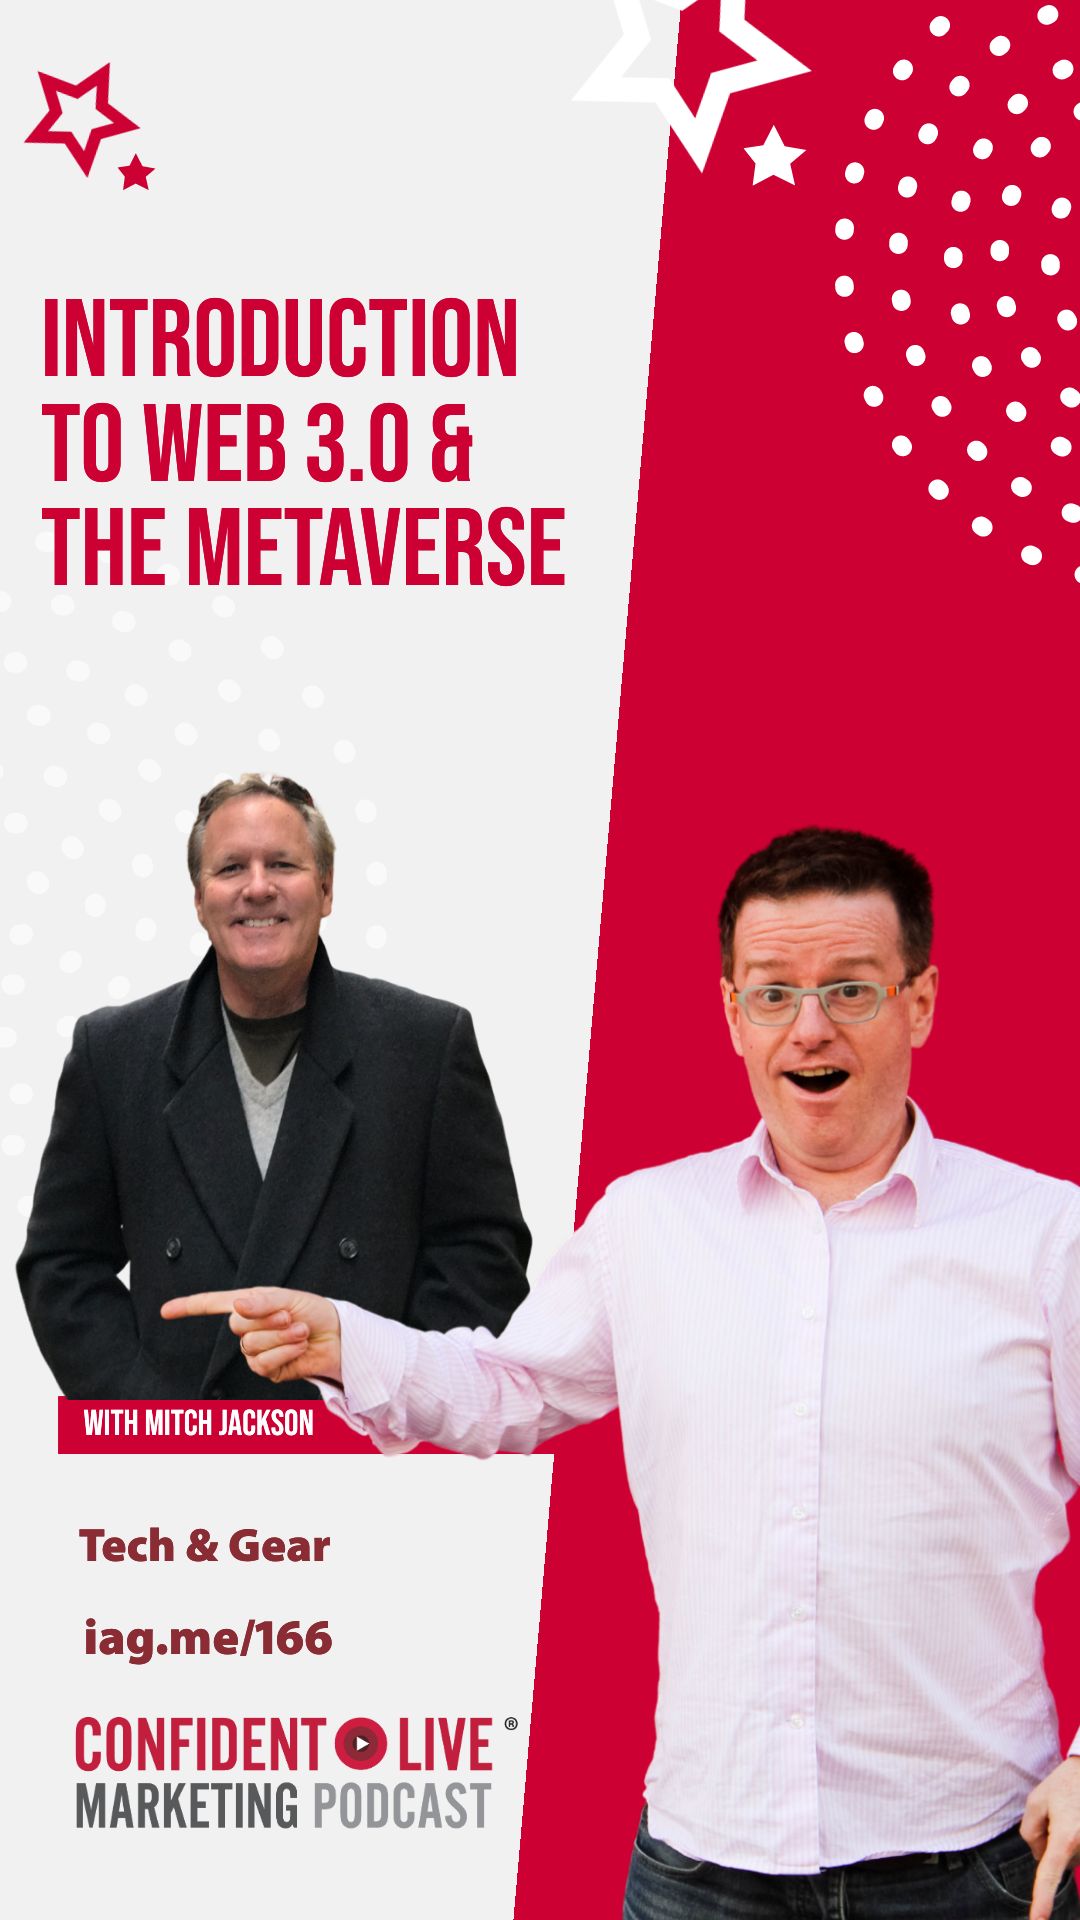 Introduction to Web 3.0 and the Metaverse